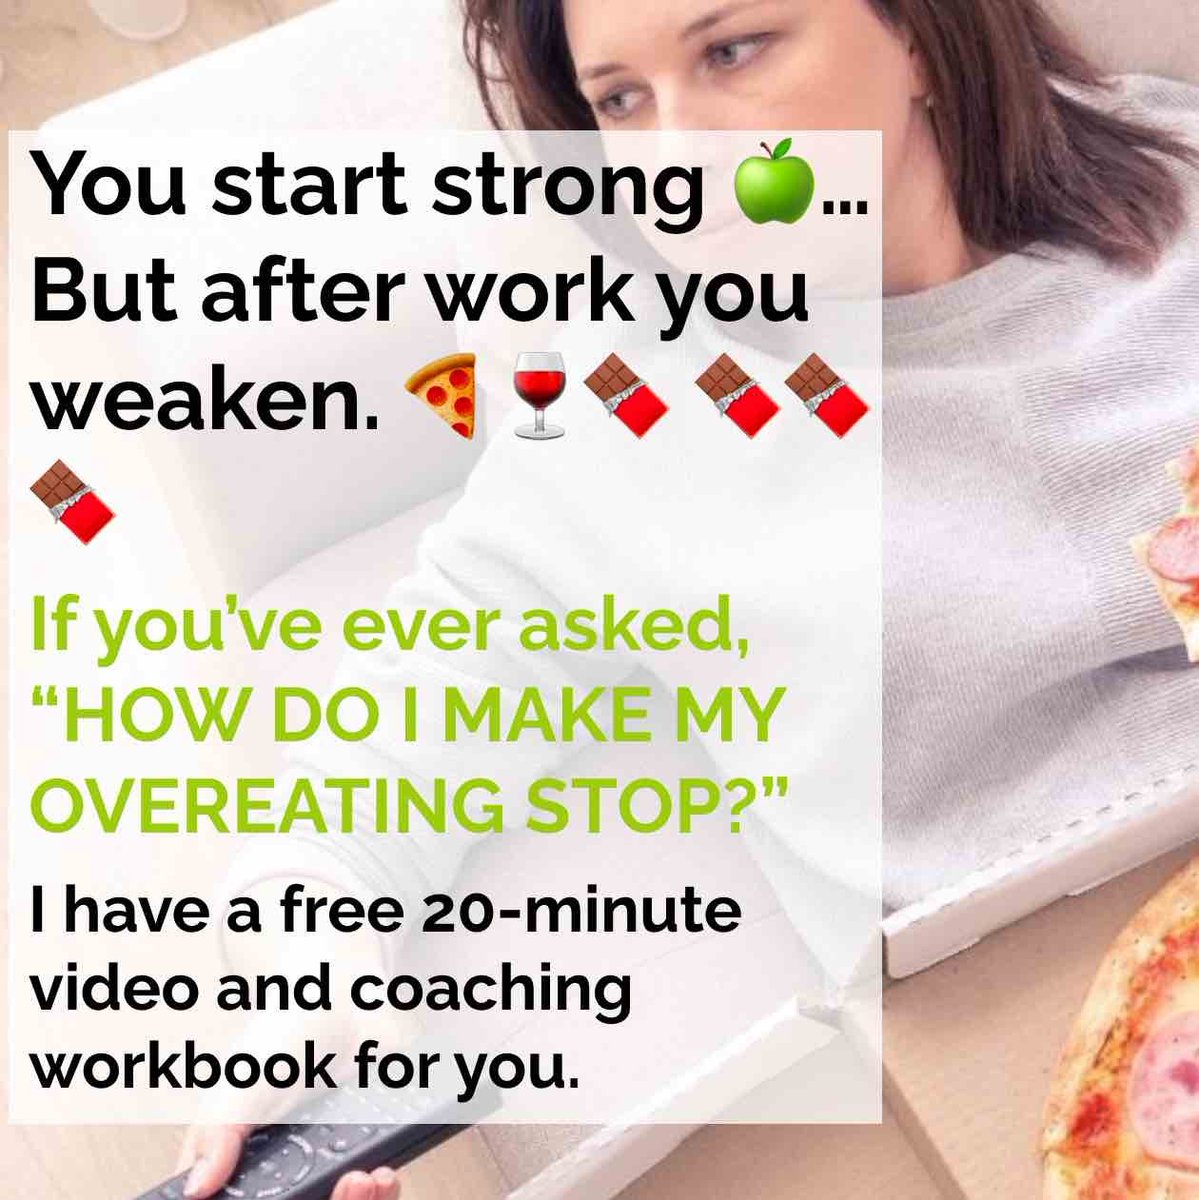 How do I stop overeating every day, after work? I have a free 20-minute video and self-coaching workbook for you. 

lauralloyd.co/gift/

#overeating #AfterWorkOverEating #workstress #pressure #workwellbeing #lifecoach #weightlosscoaching